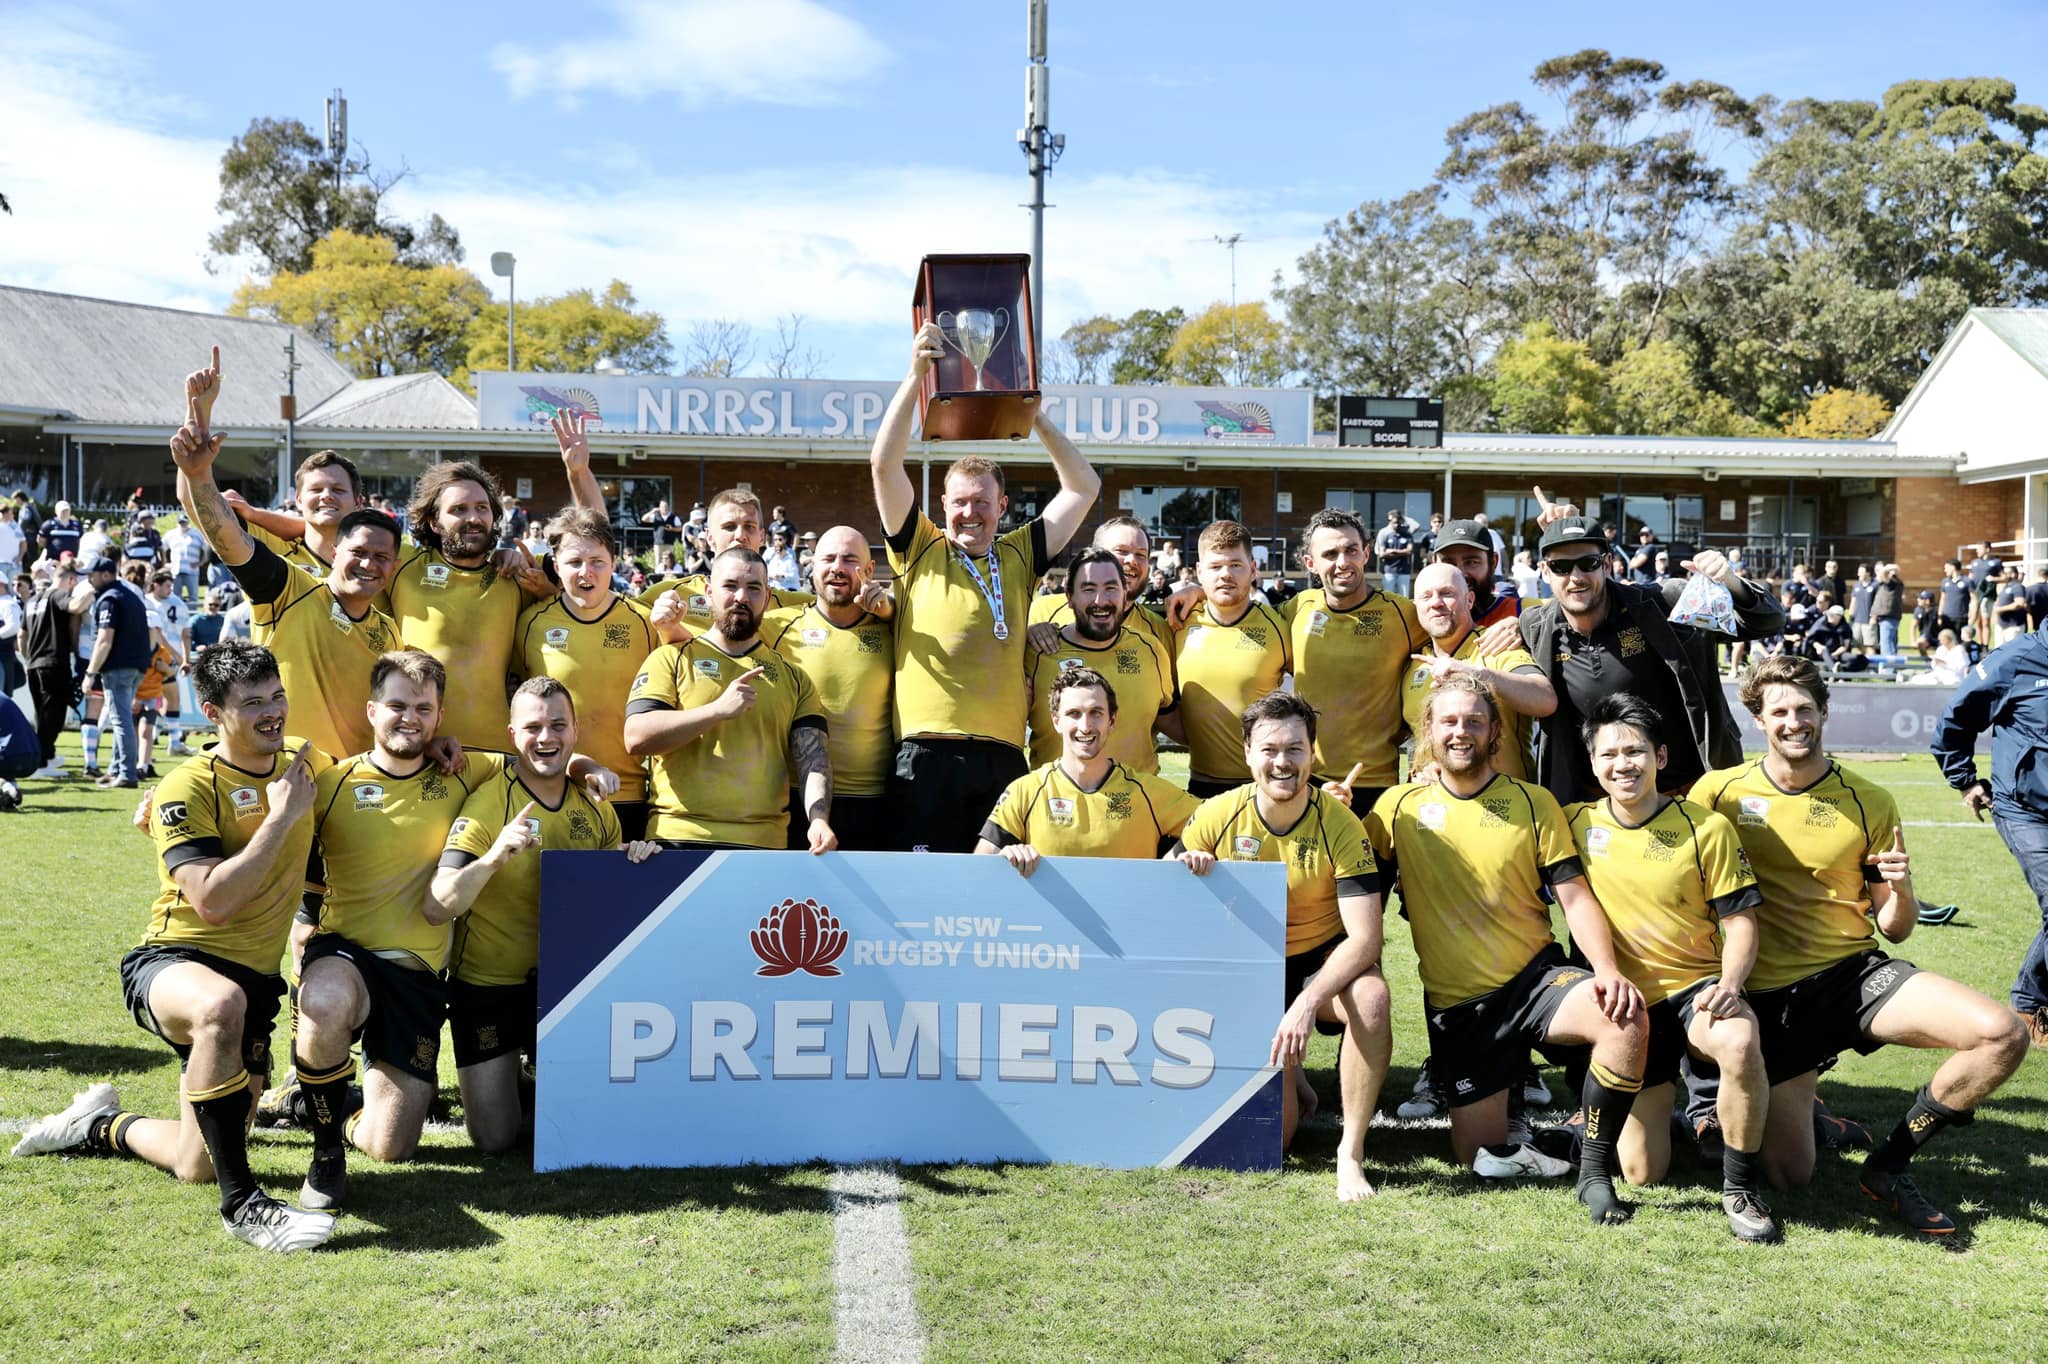 UNSW Rugby Club with their premiership trophy